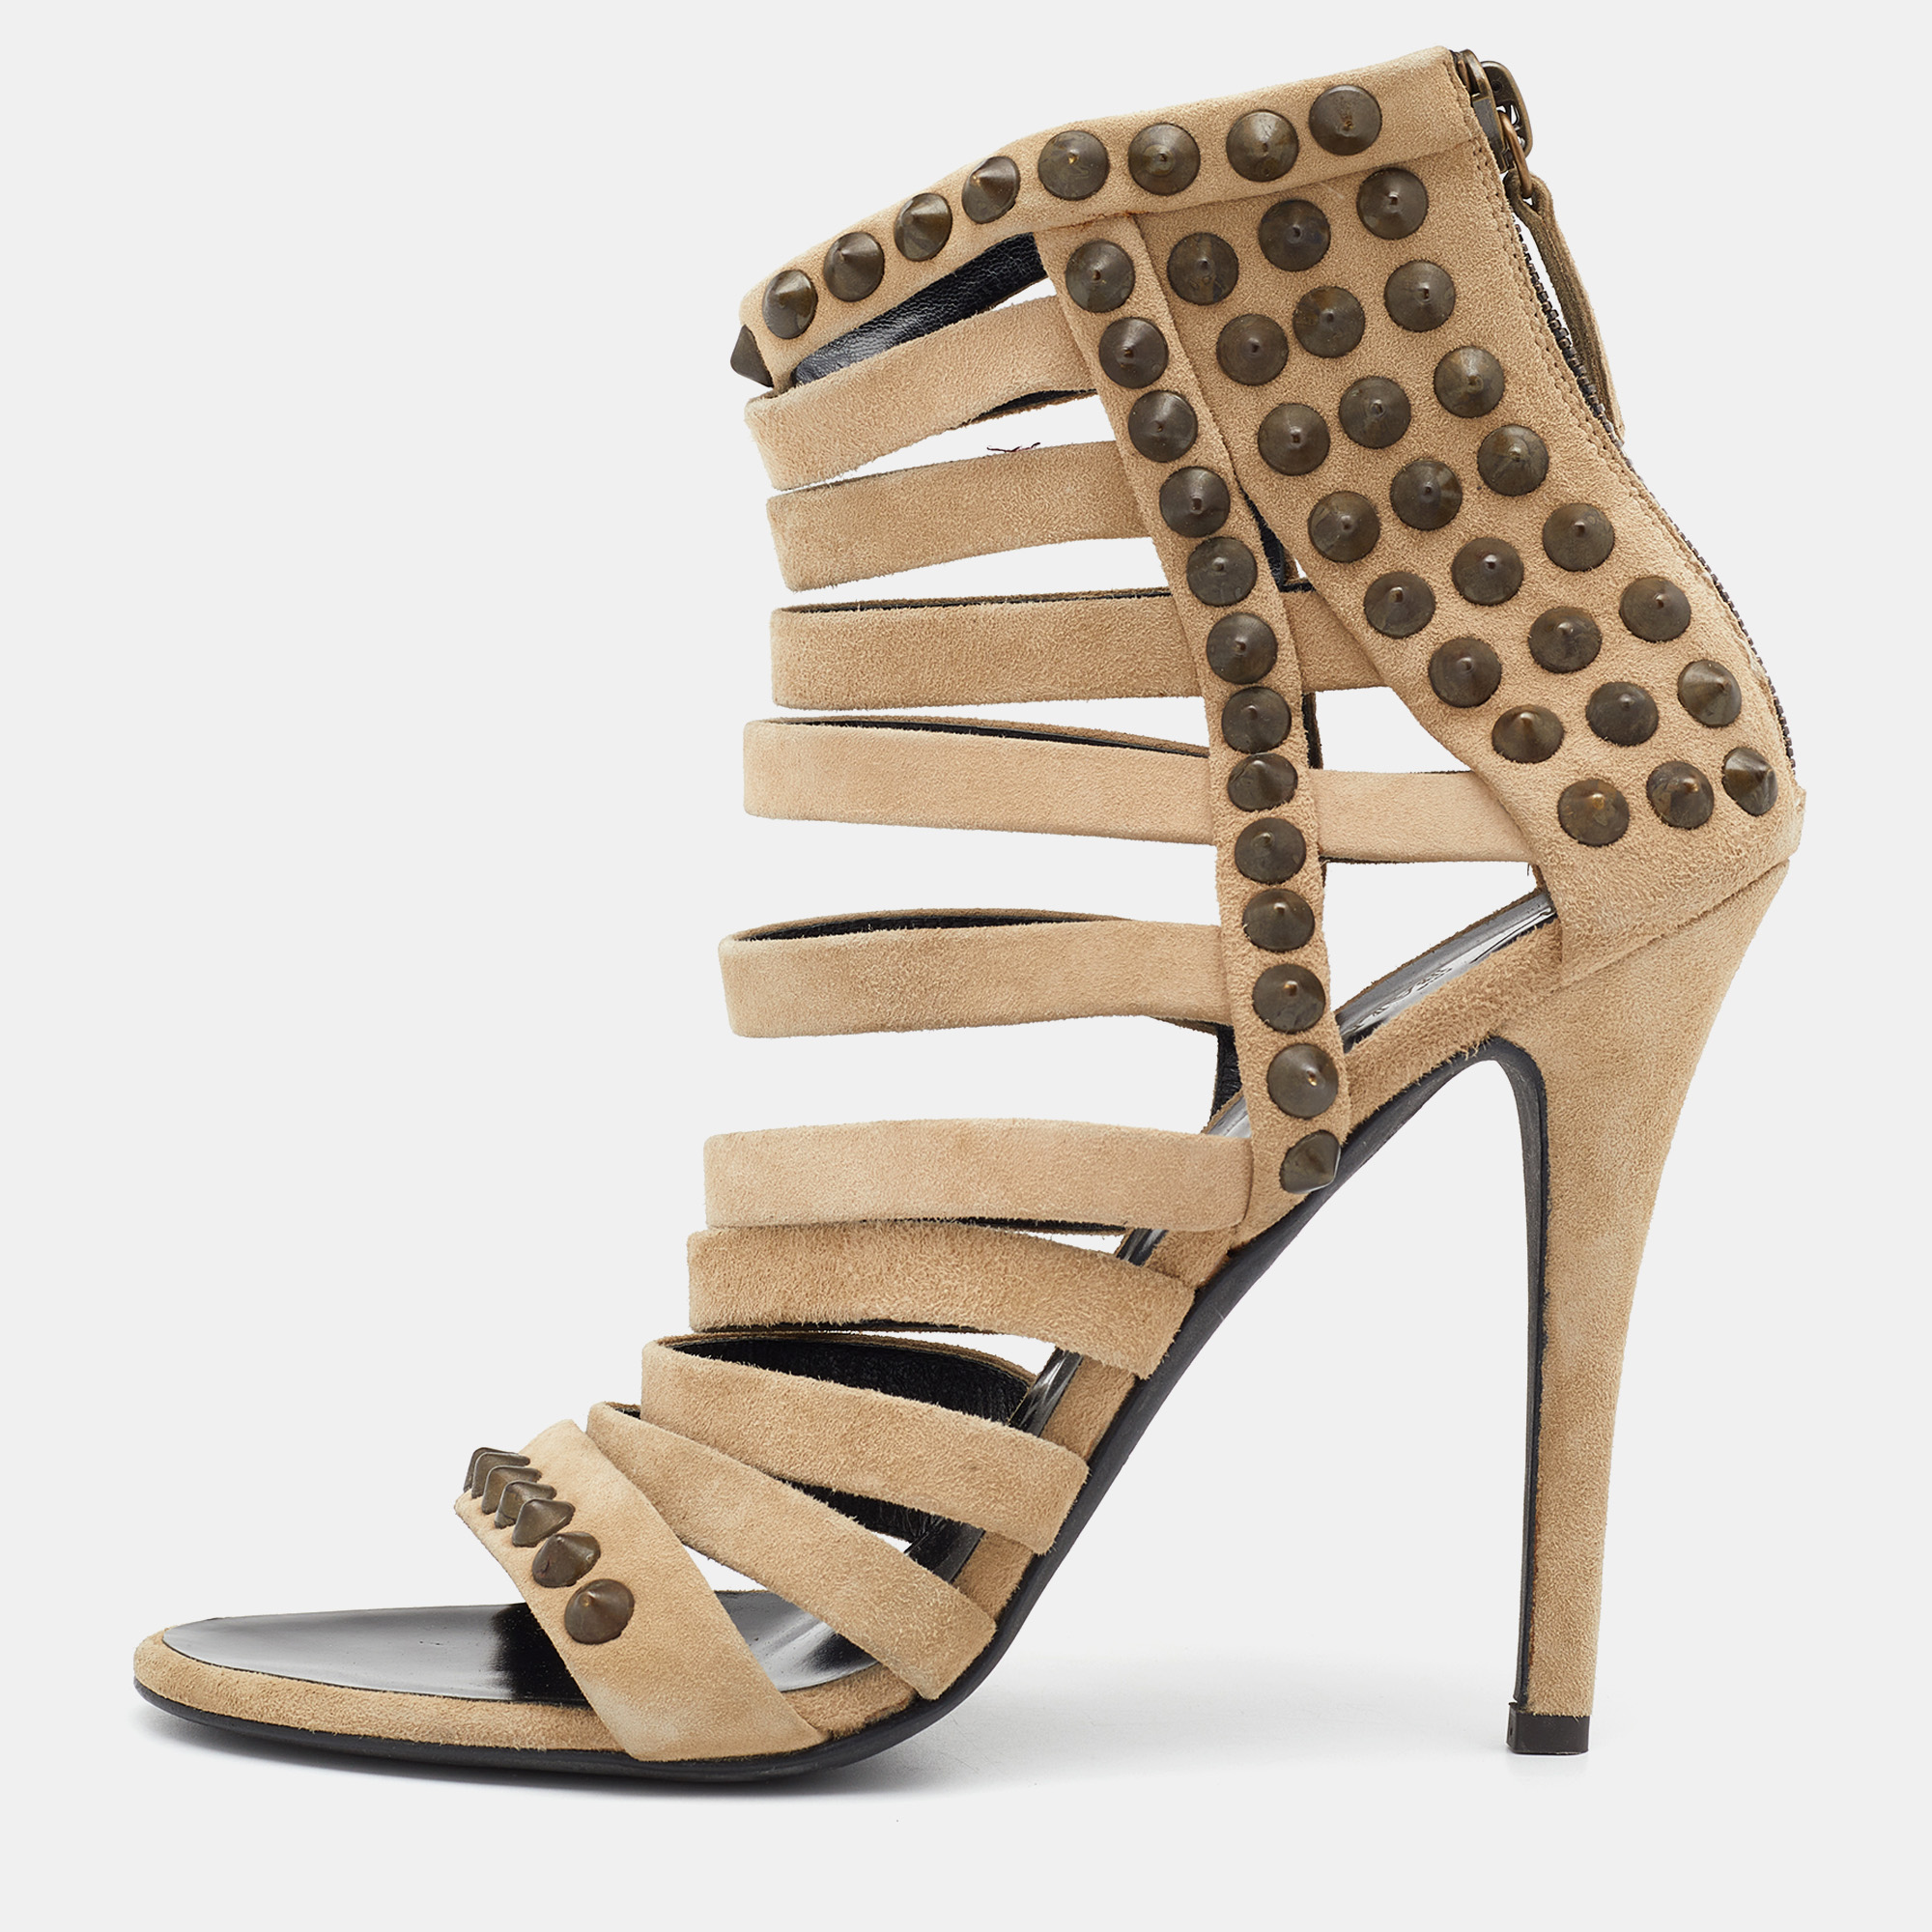 Pre-owned Giuseppe Zanotti For Pierre Balmain Beige Suede Studded Strappy Sandals Size 40